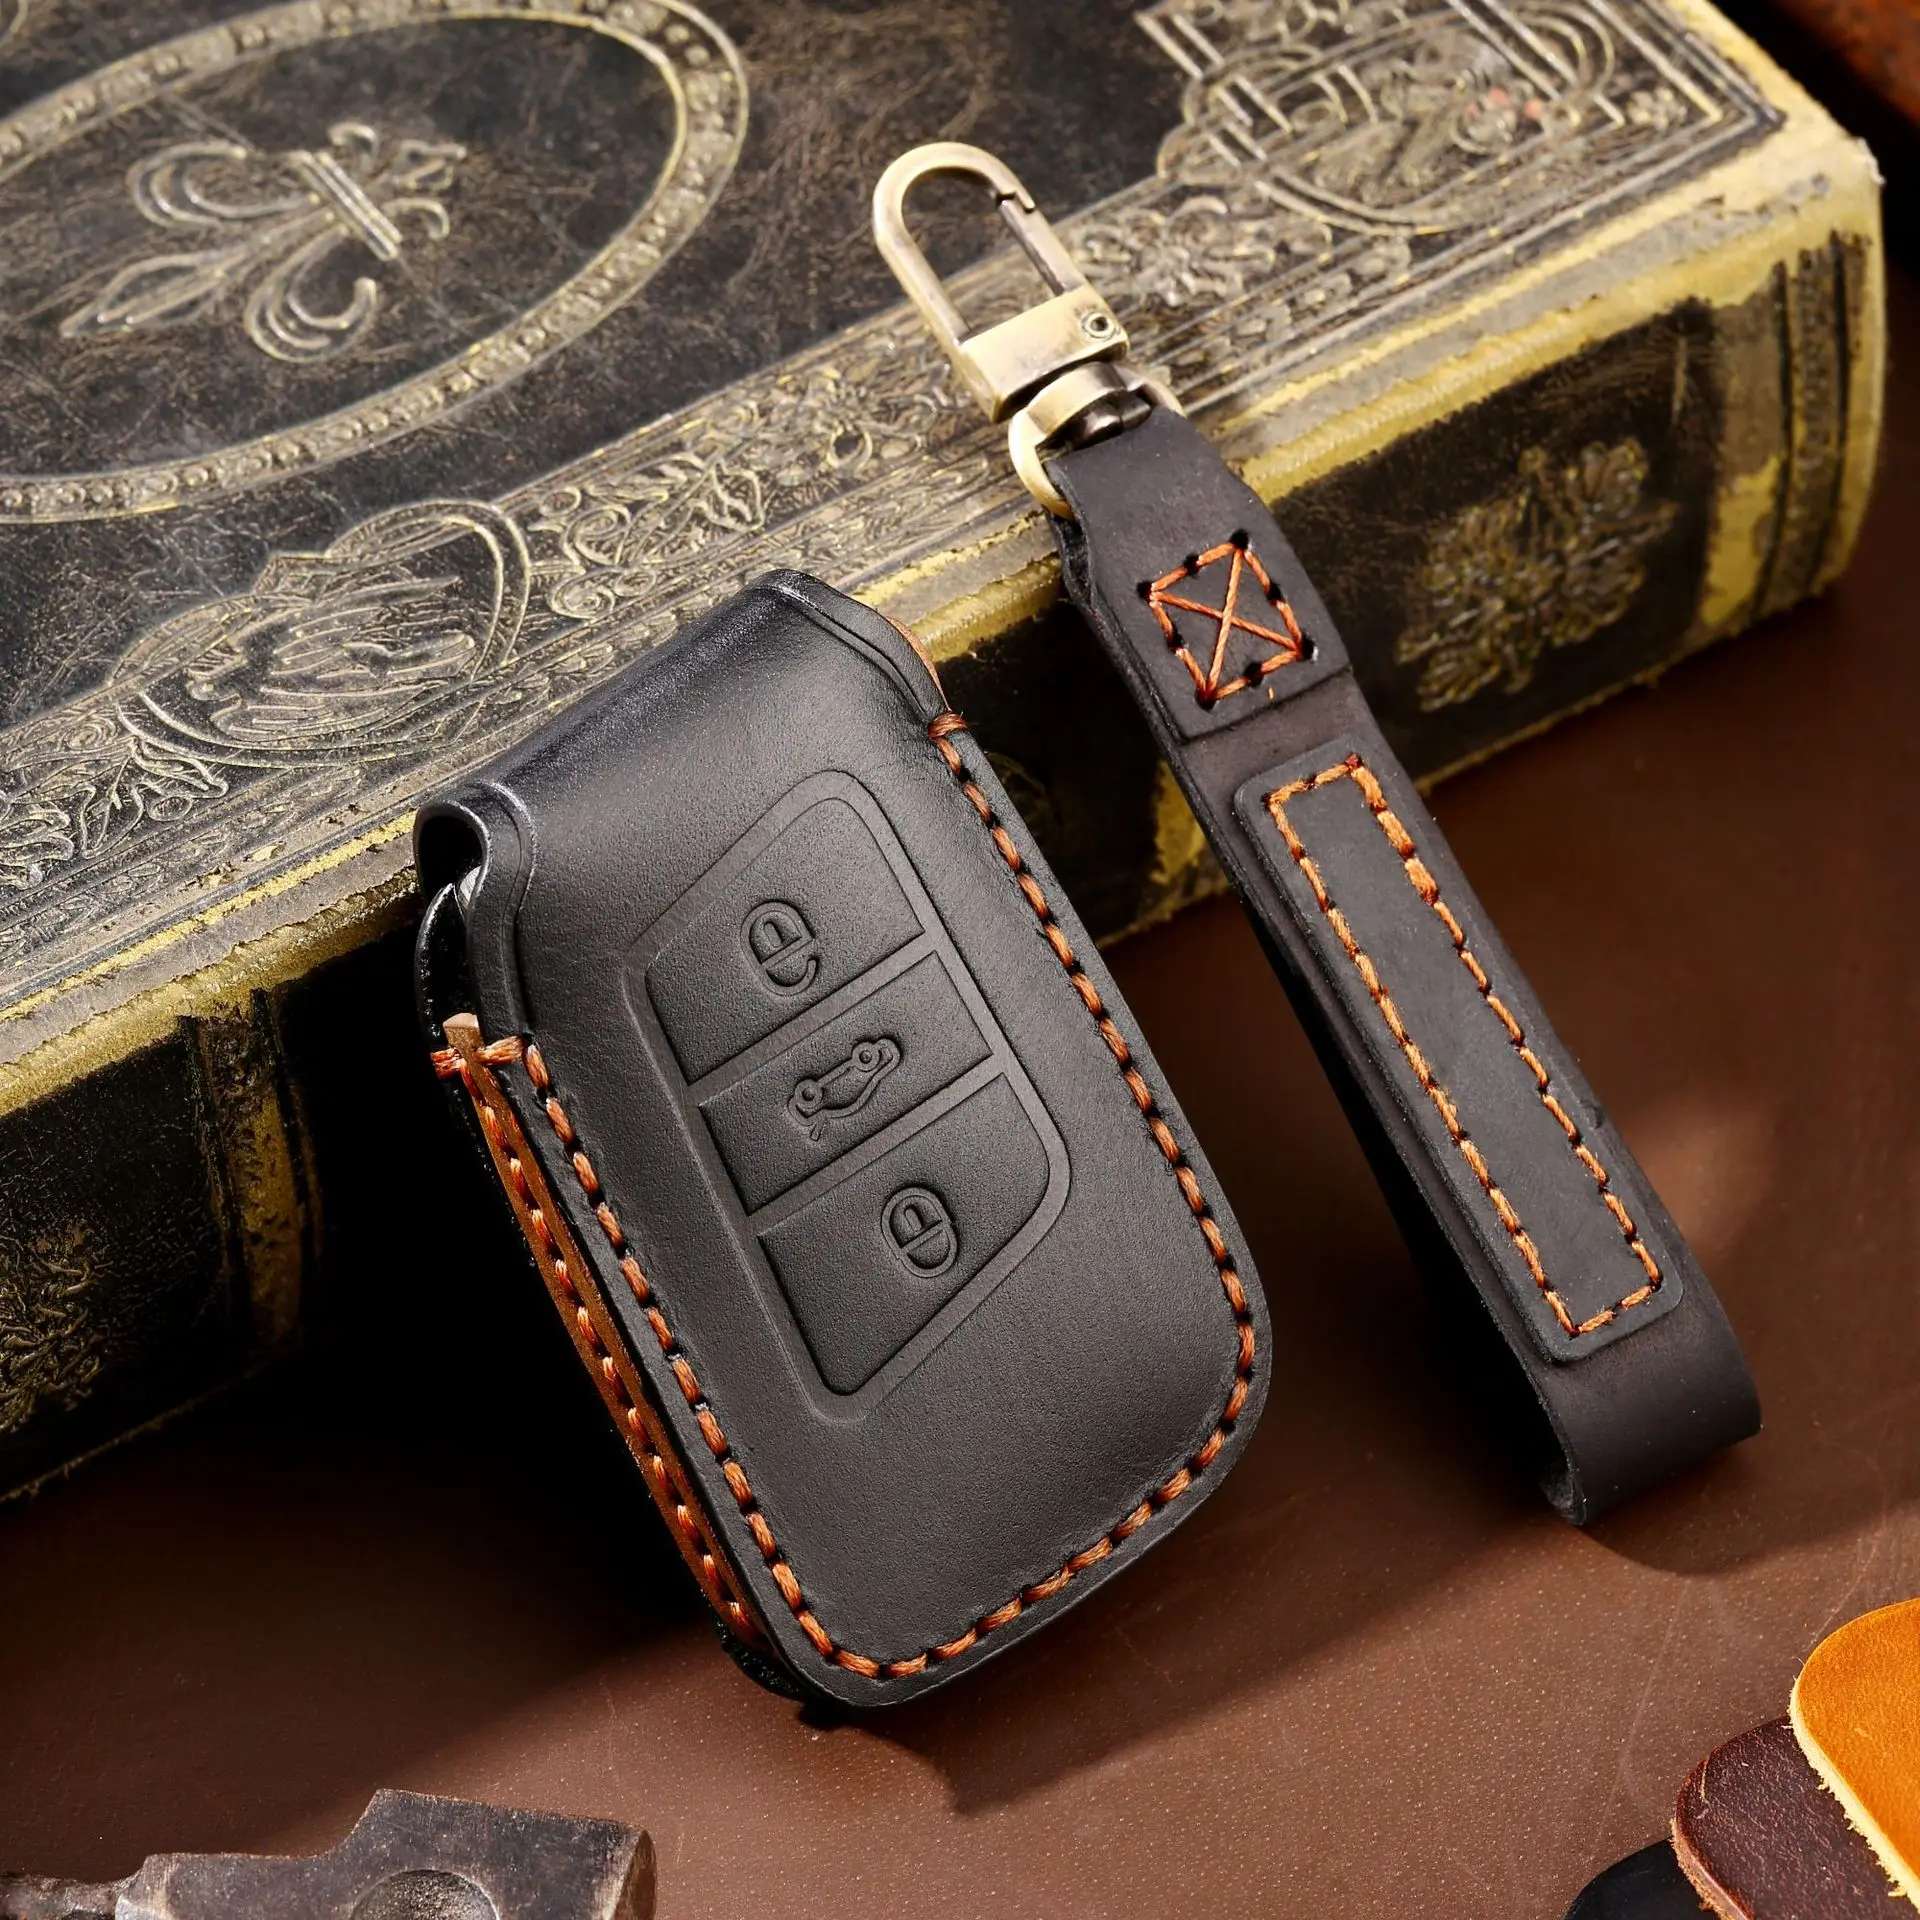 

Luxury Leather Car Key Case Cover Fob Protector for Volkswagen Passat Lavida Tiguan Golf Accessories Keychains Holder Keyring